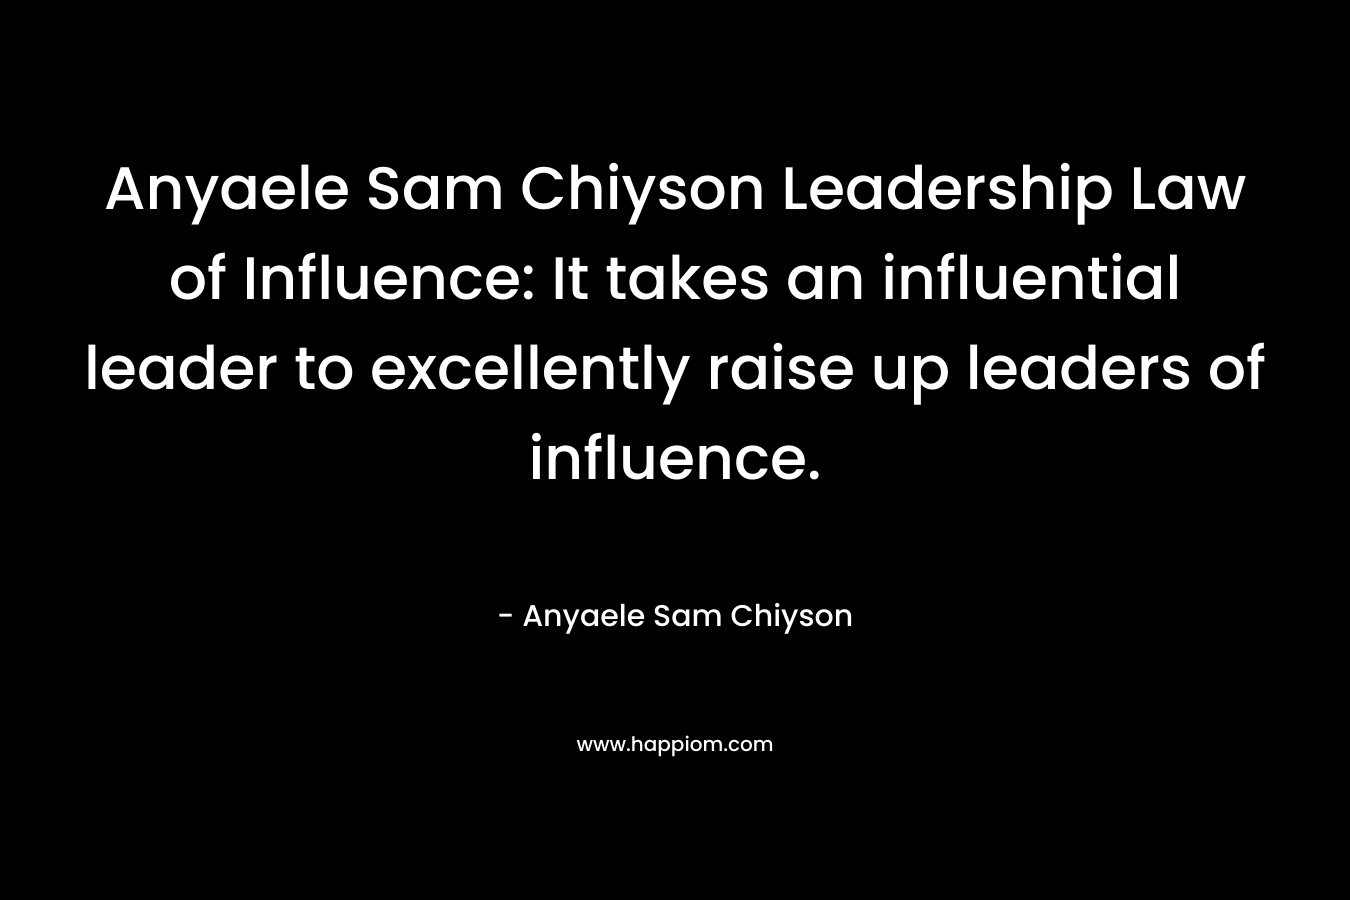 Anyaele Sam Chiyson Leadership Law of Influence: It takes an influential leader to excellently raise up leaders of influence. – Anyaele Sam Chiyson